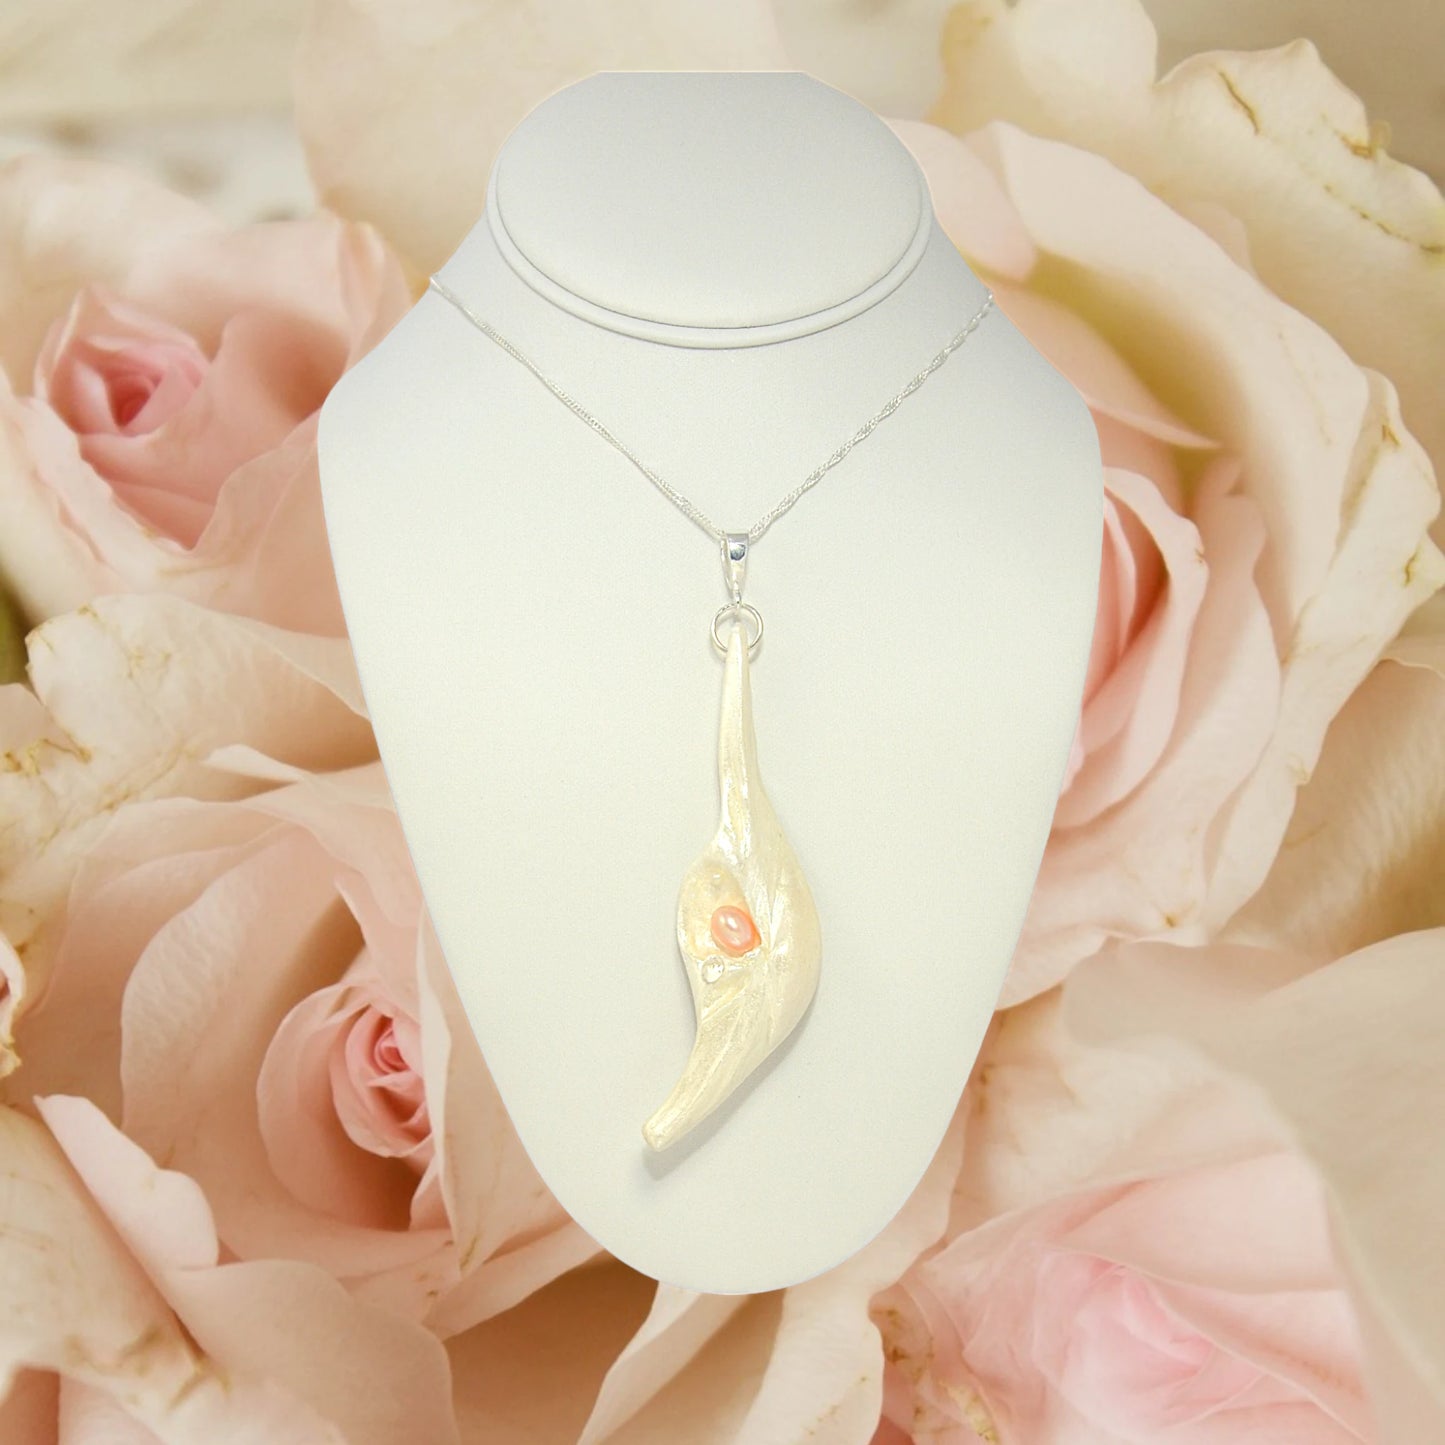 Nefertiti natural seashell and a real 8 mm pink freshwater Pearl, a baby pearl and a 5mm faceted Herkimer diamond compliments the pendant. The pendant is shown hanging a white necklace displayer with pink roses in the background.